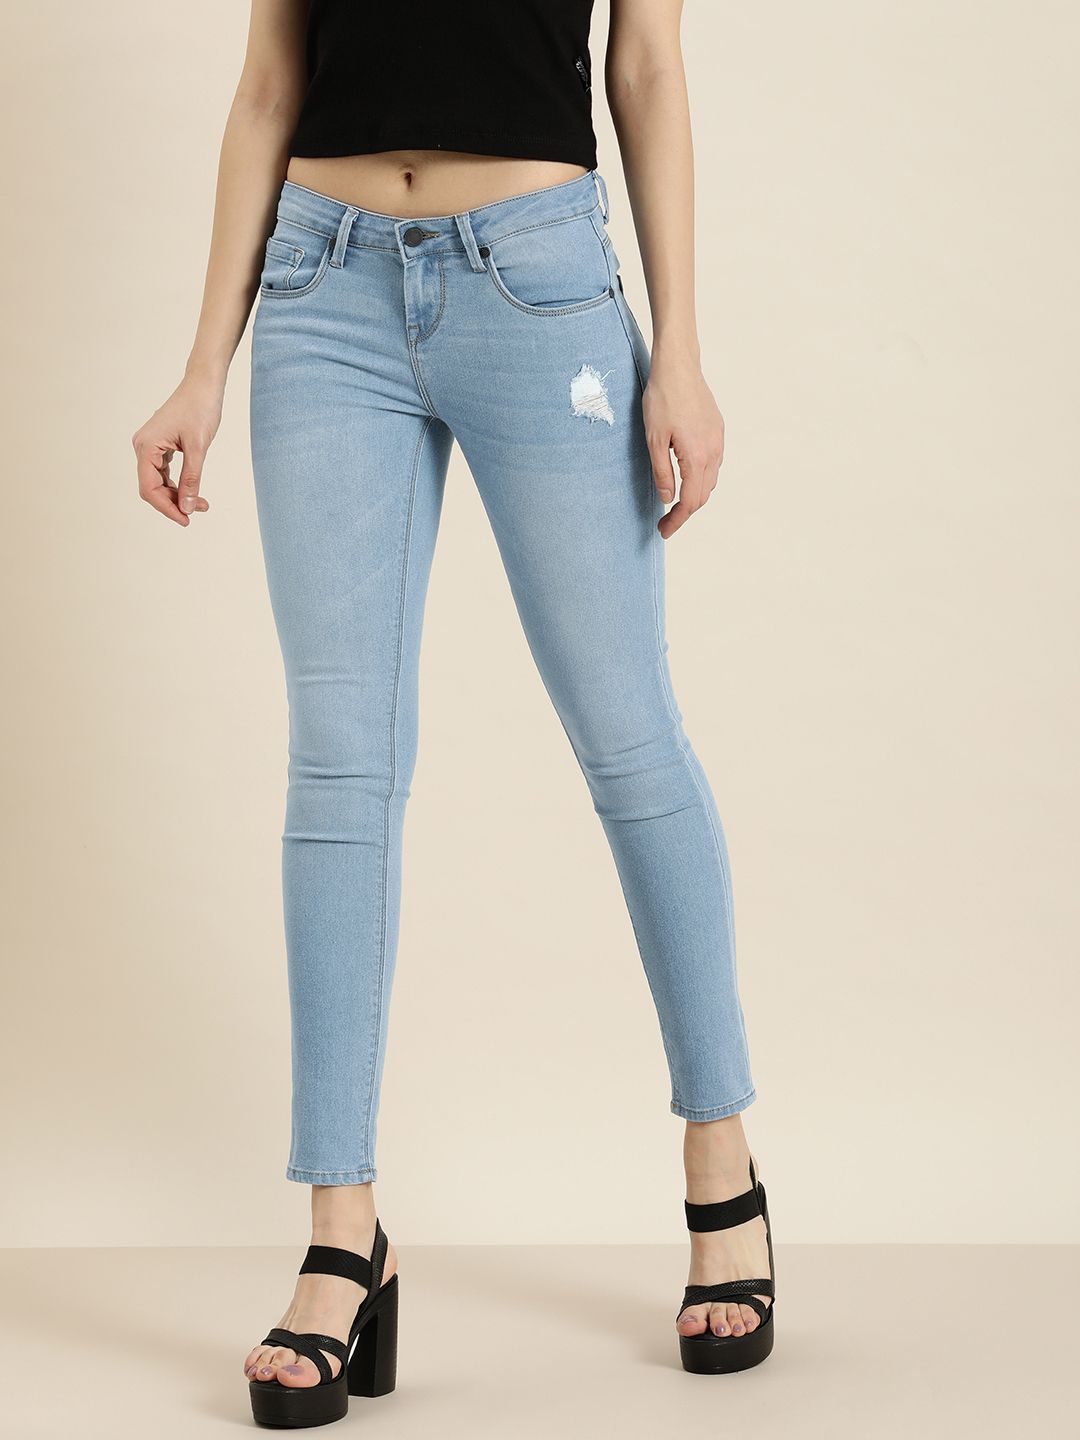 Moda Rapido Women Blue Skinny Fit Light Fade Low Distress Stretchable Jeans Price in India